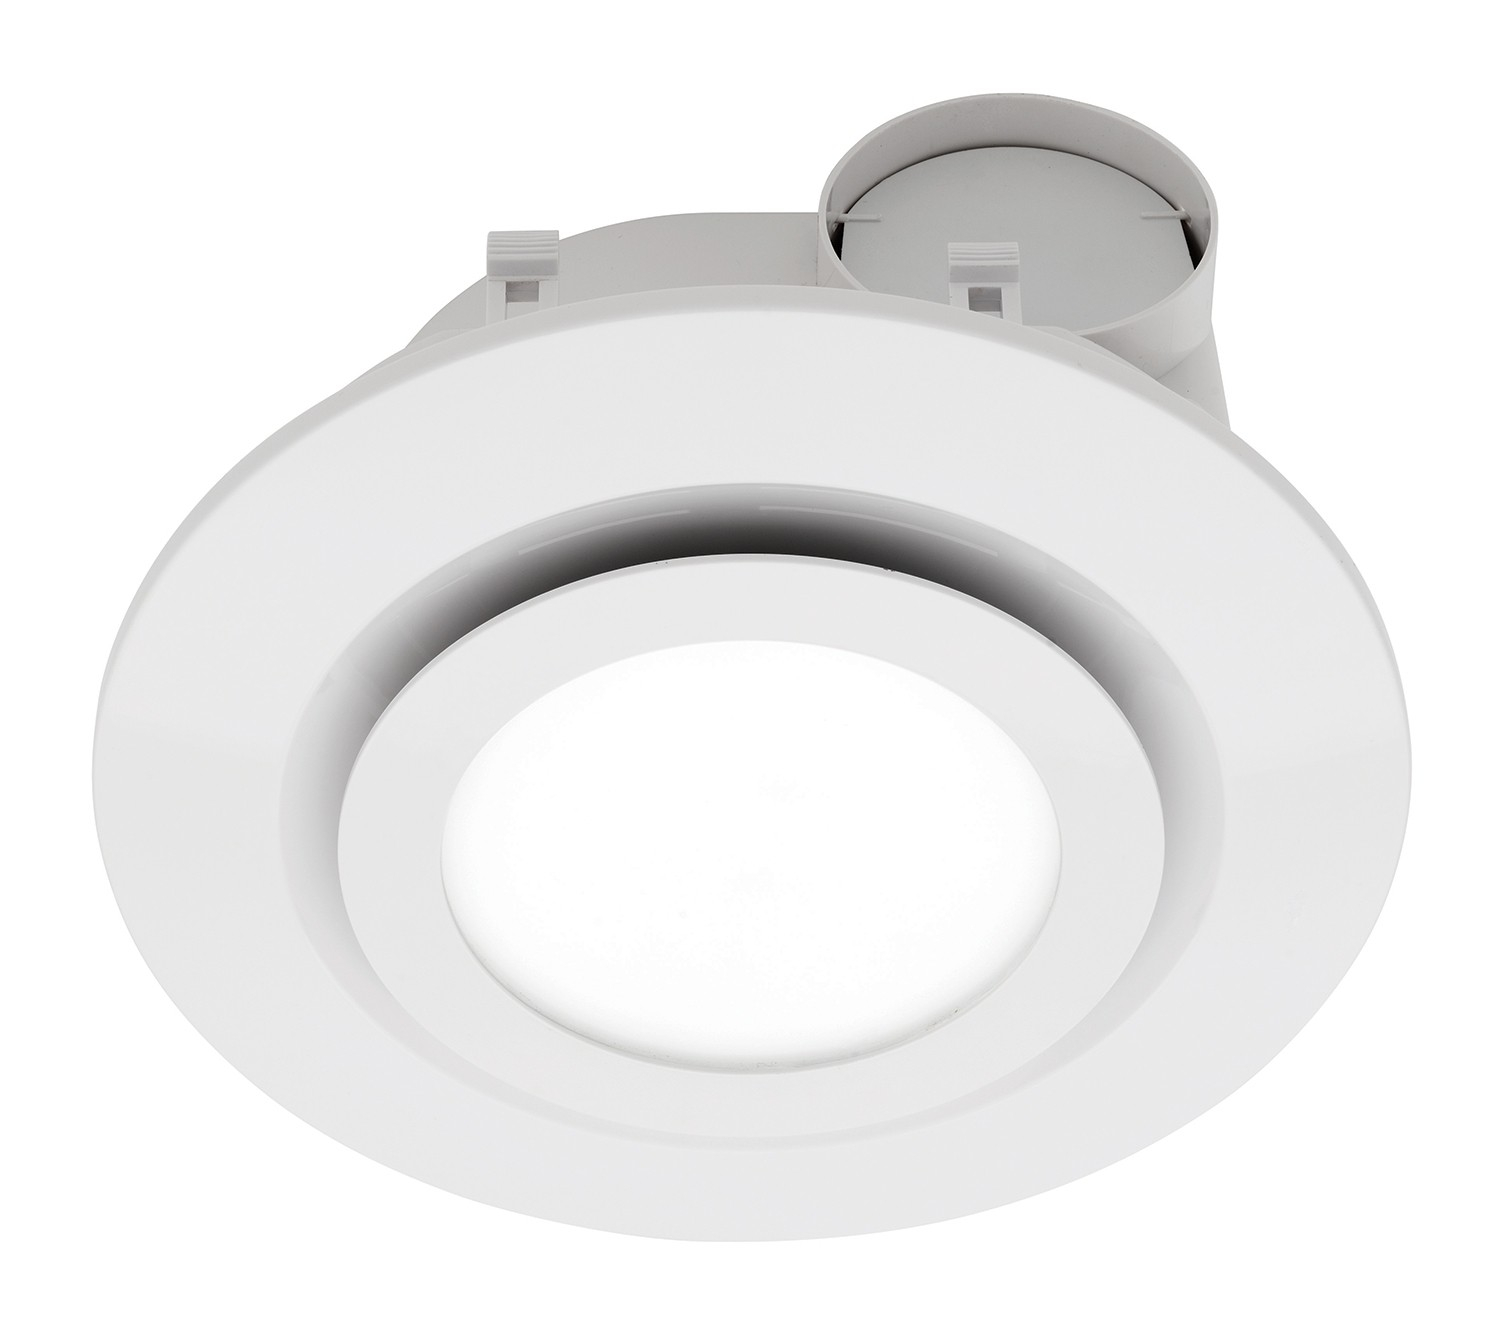 Mercator Lighting Be190espwh Starline Modern White Round intended for dimensions 1500 X 1334